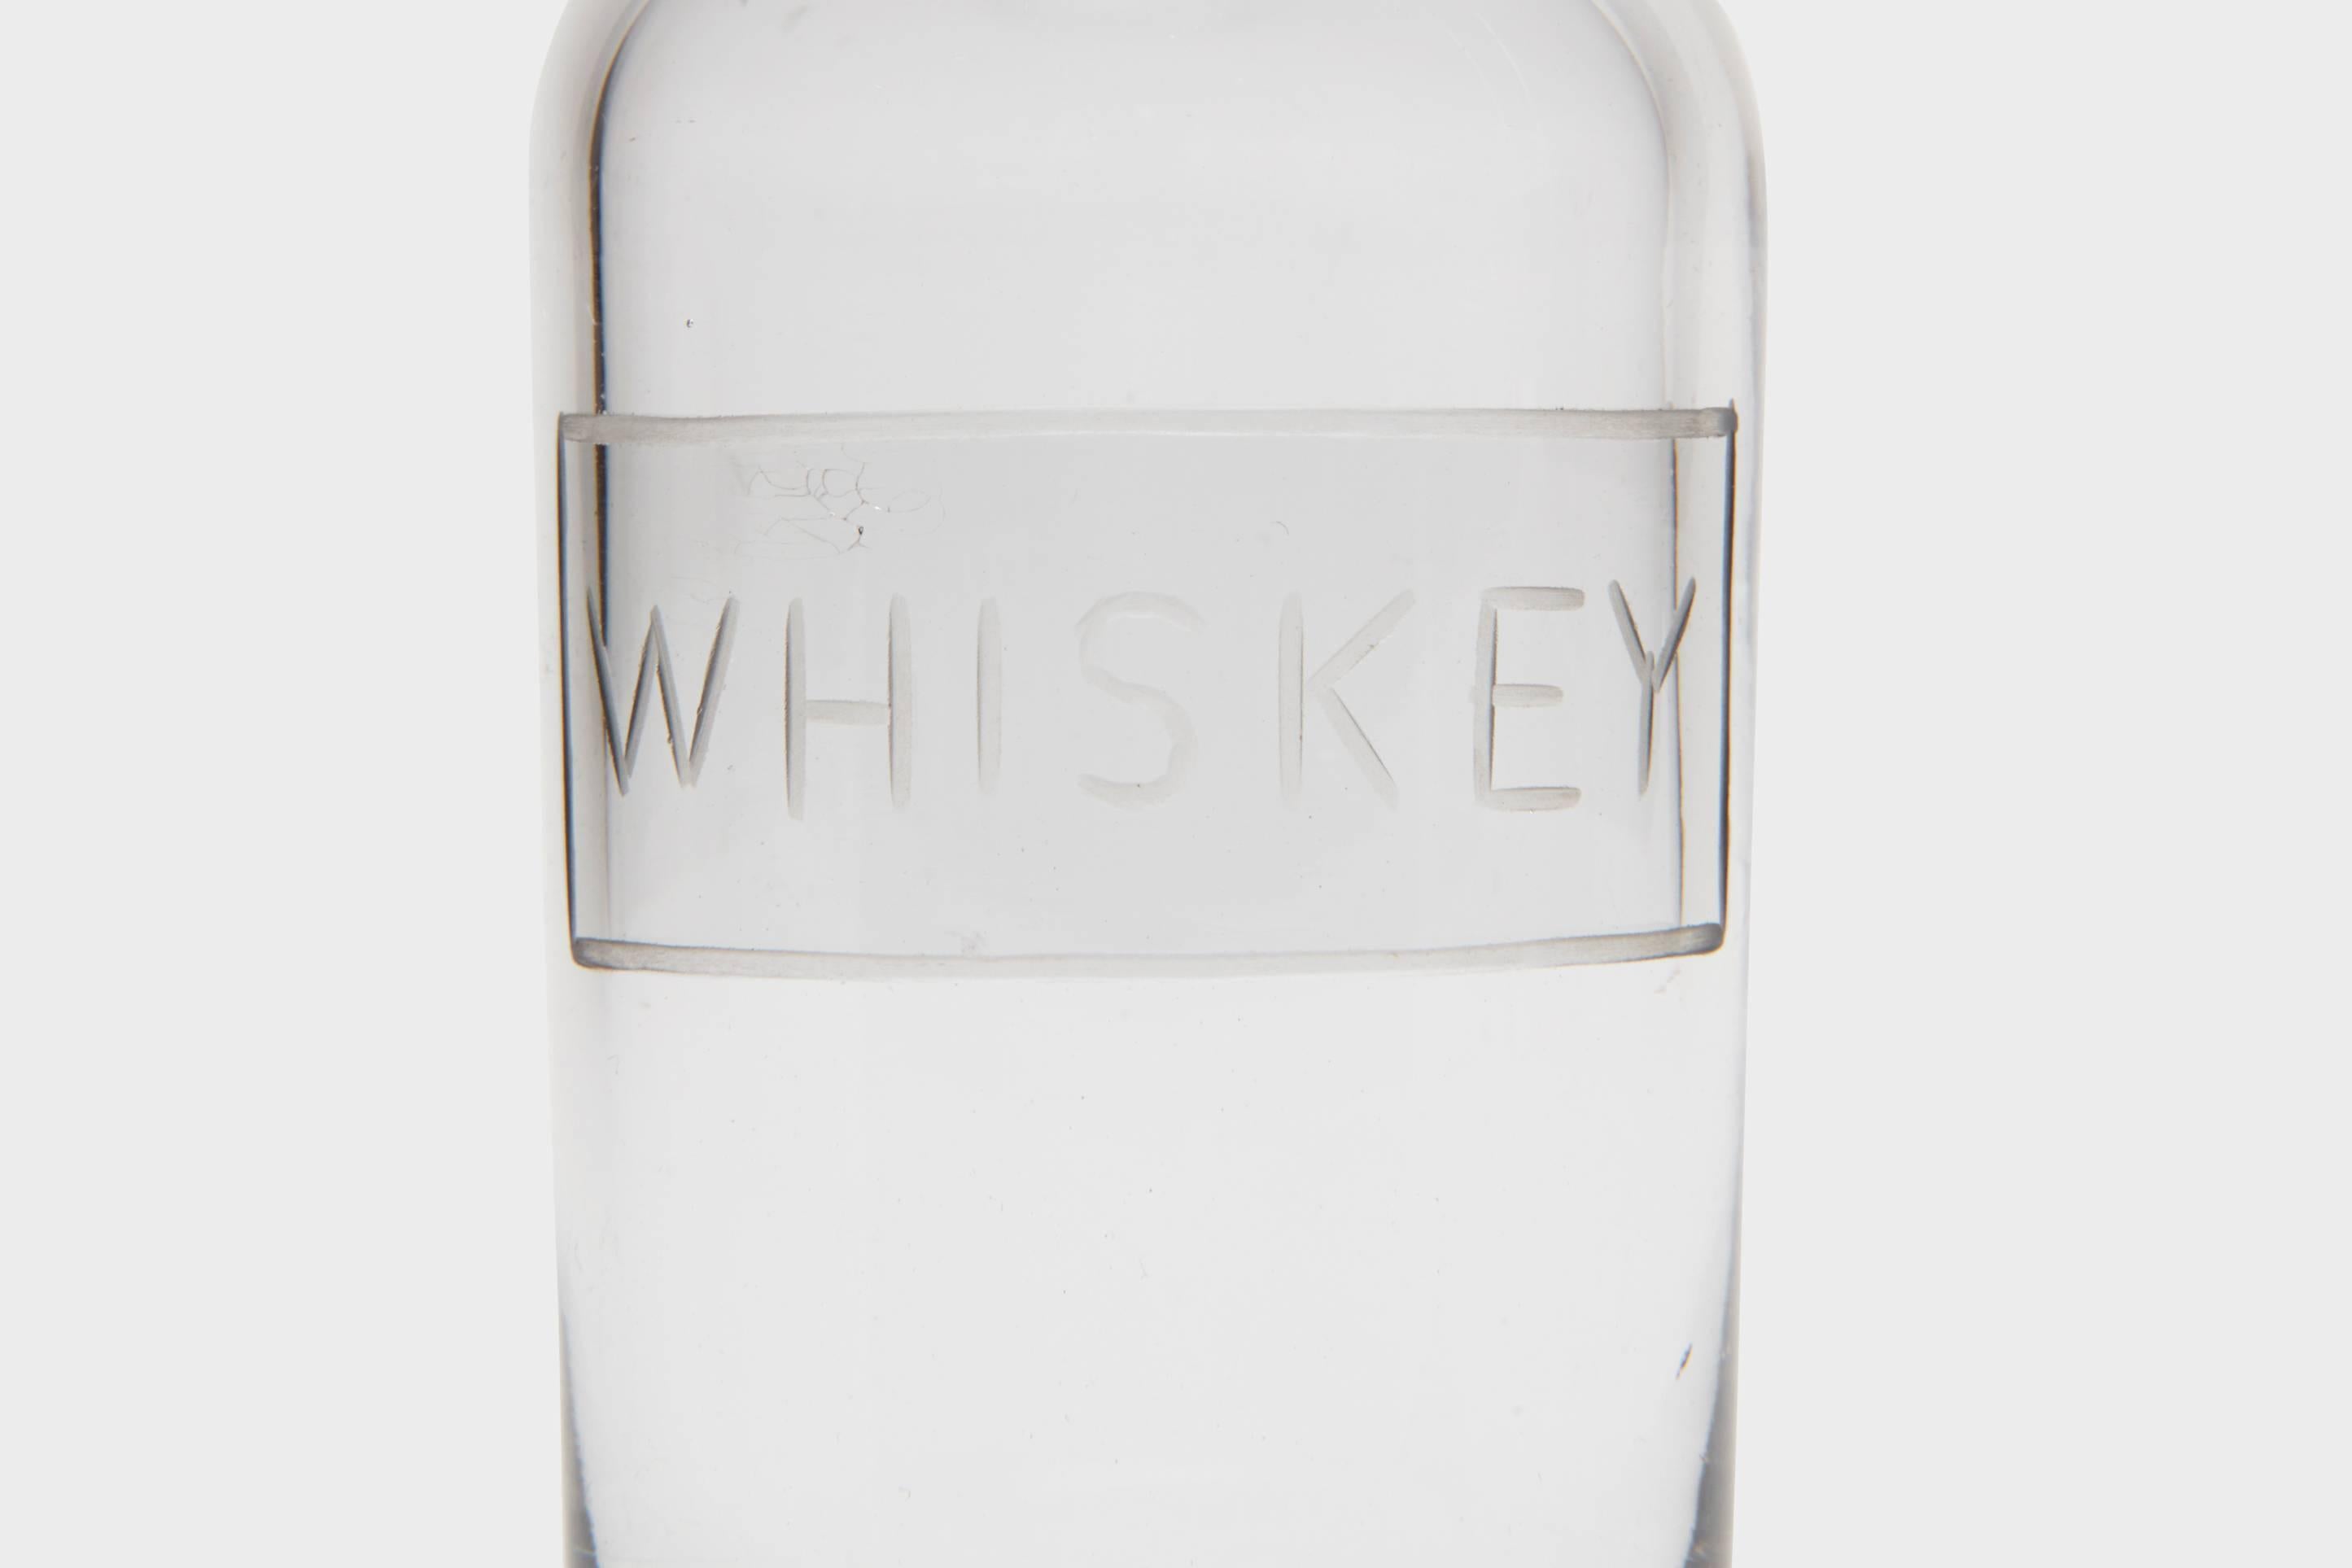 A sterling silver and handblown glass miniature 'Whiskey' bottle. This novelty piece of barware can have a myriad of functions, not all of which need limiting to the home bar.
Aside from decanting a small serving of your favourite whiskey, there is